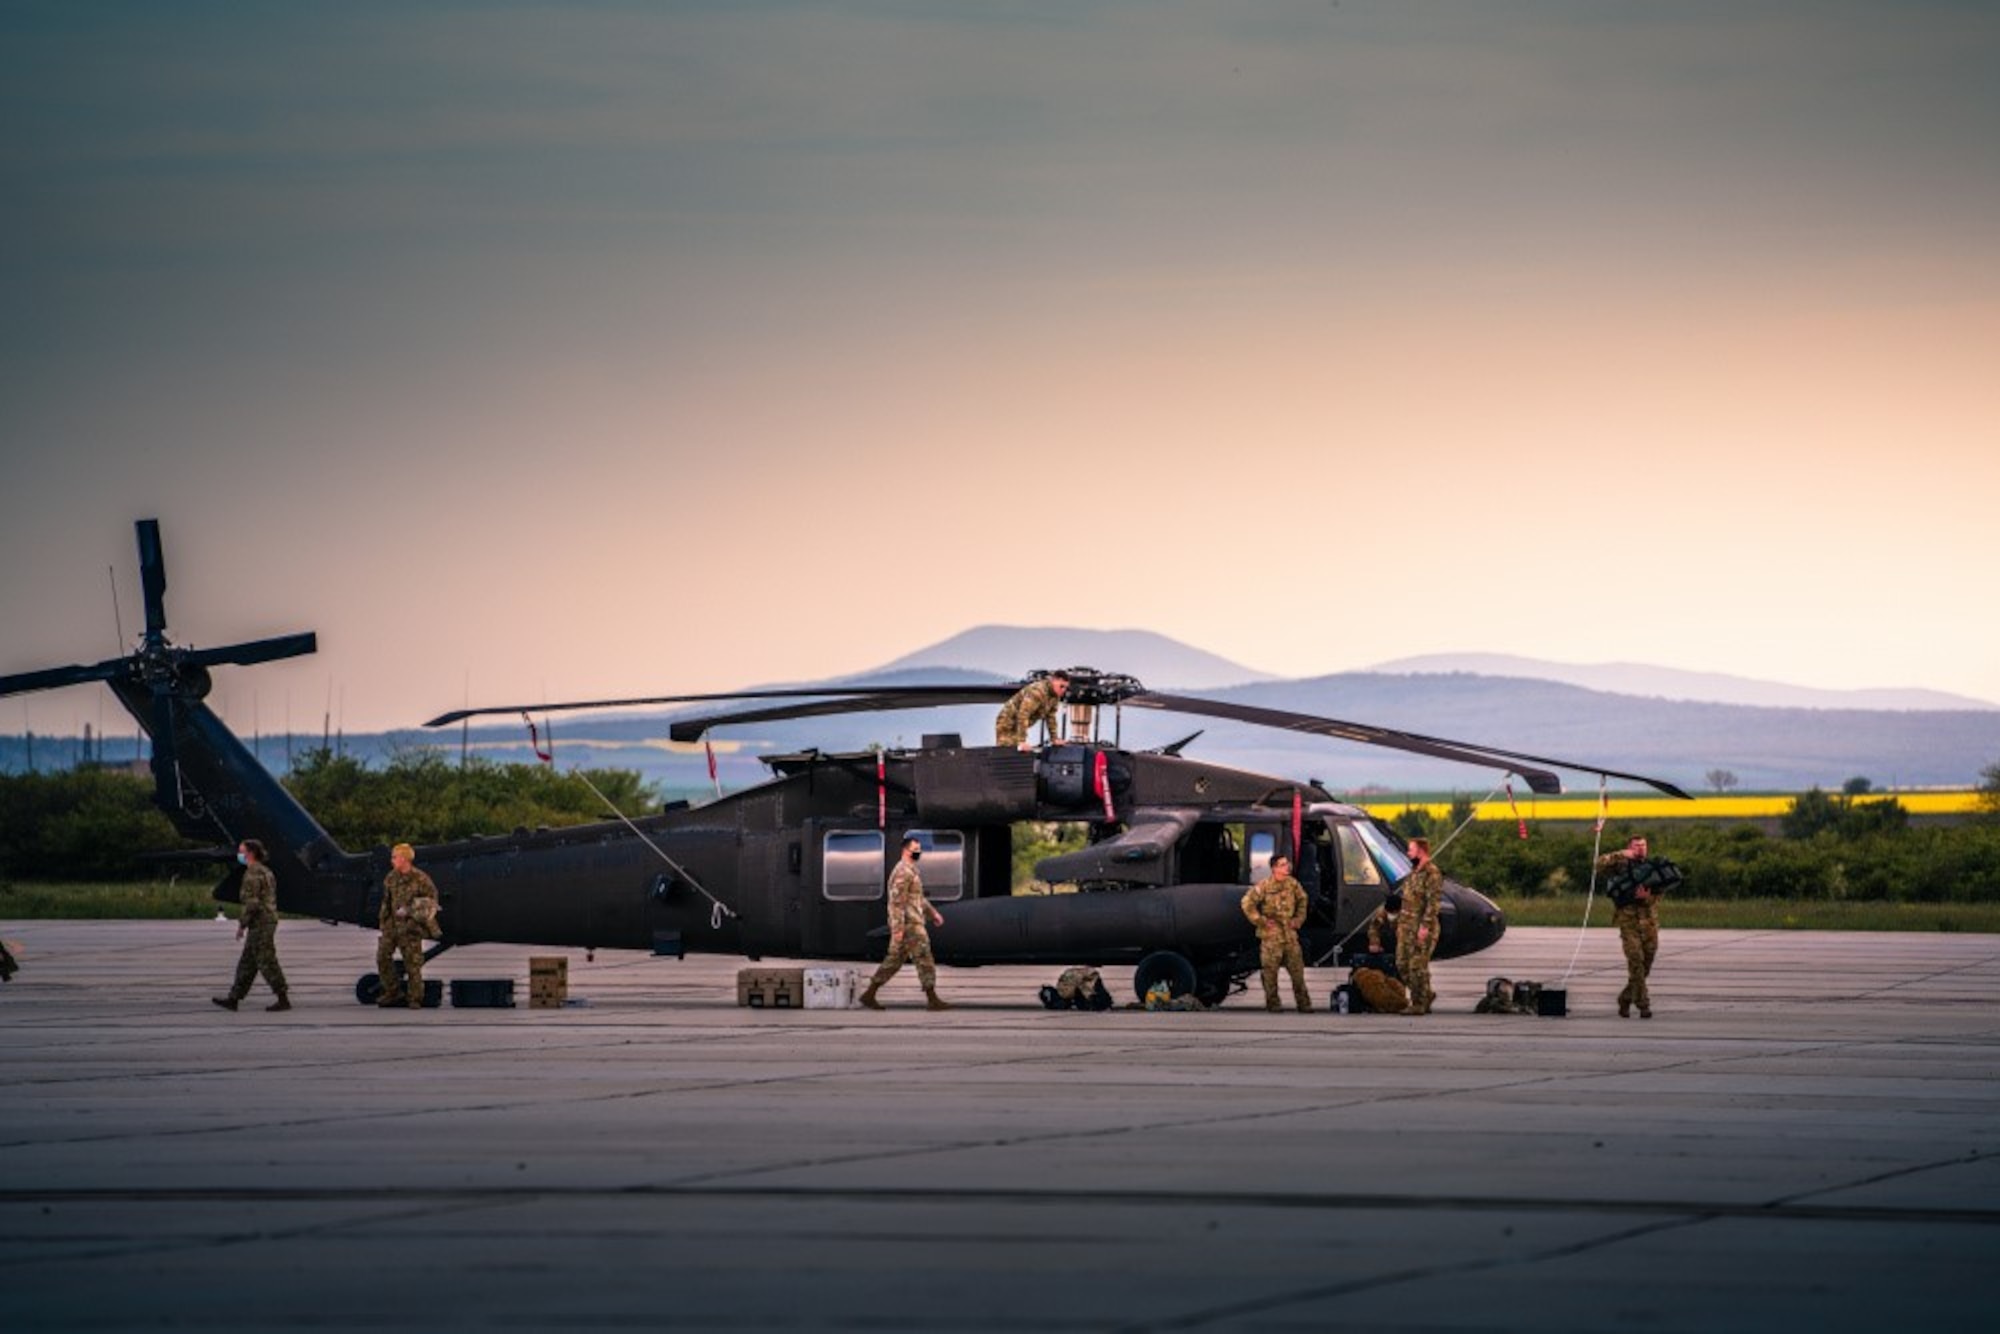 UH-60 crews from 1st Battalion, 214th Aviation Regiment unload their Blackhawks after arriving at Bezmer Airfield, Bulgaria, on April 30, 2021, for Exercise Swift Response, part of DEFENDER-Europe 21. 12th Combat Aviation Brigade demonstrated its ability to rapidly project aviation assets from their home bases in Germany to Eastern Europe by deploying 17 aircraft, crossing seven countries in under 12 hours. (U.S. Army photo by Maj. Robert Fellingham.)